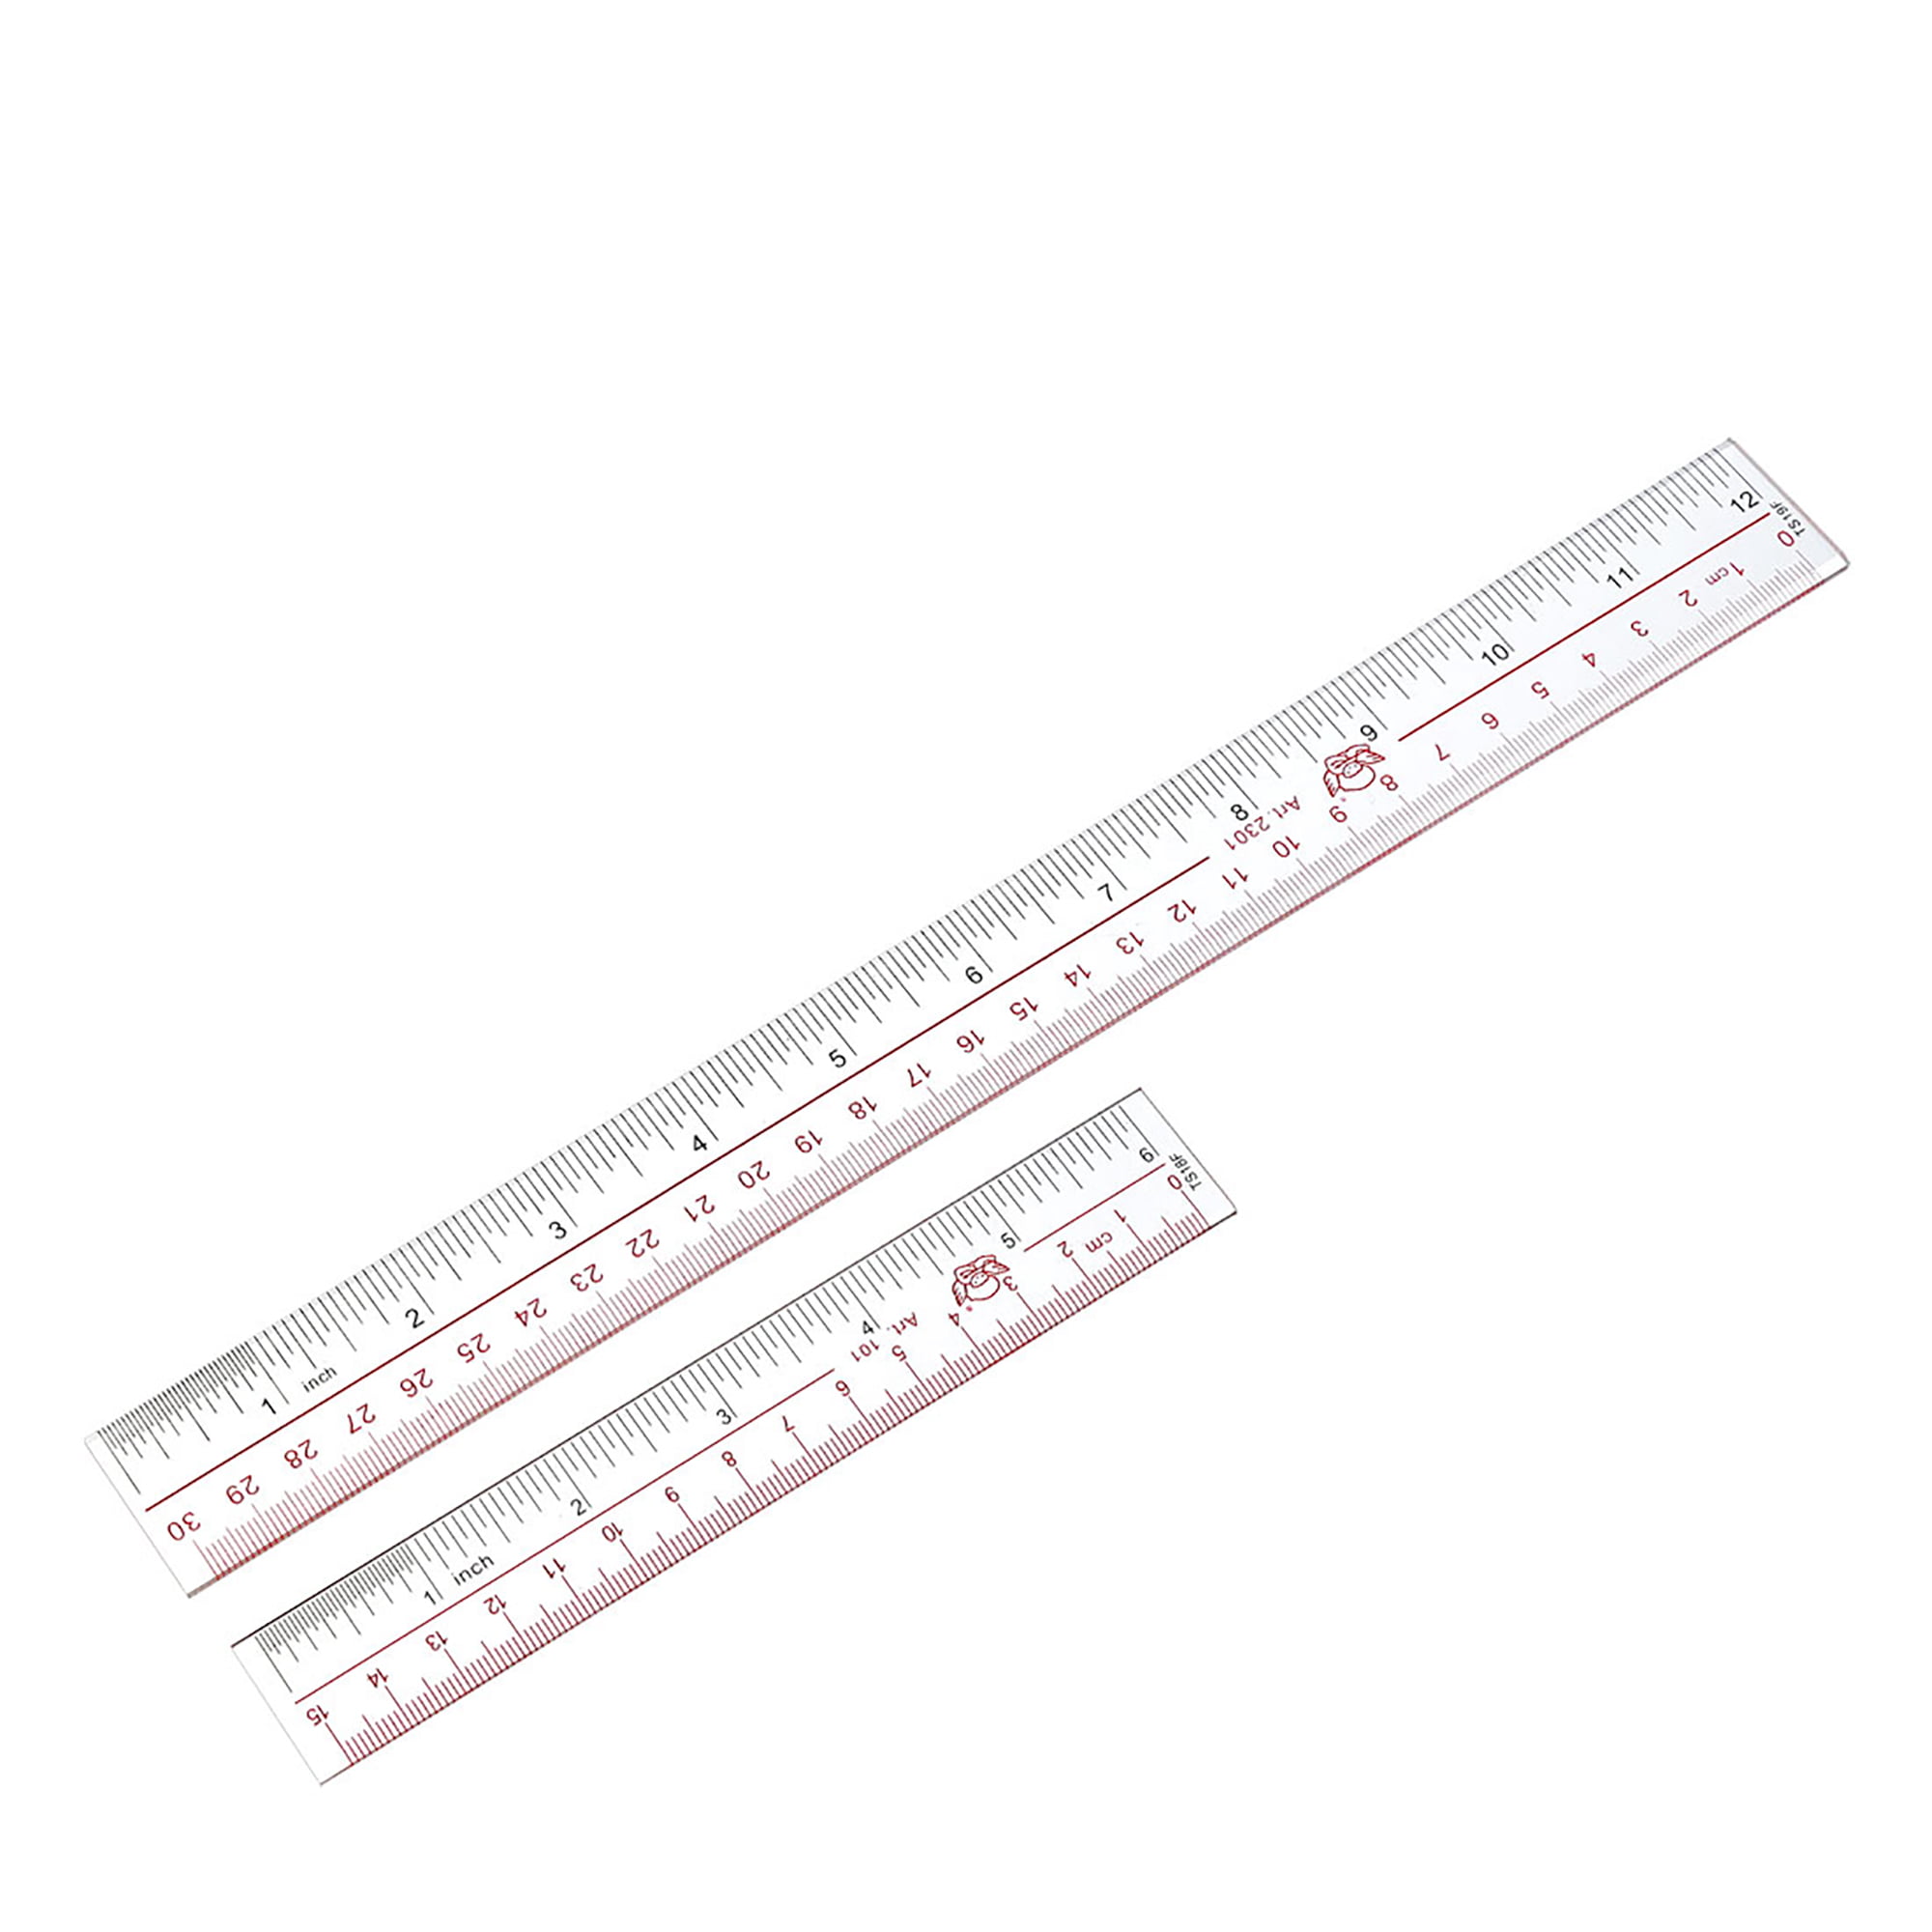 Plastic Ruler 15cm 6 inches Yellow Measuring Tool for Office - 157 x 31mm  (L x W) - Bed Bath & Beyond - 27577780